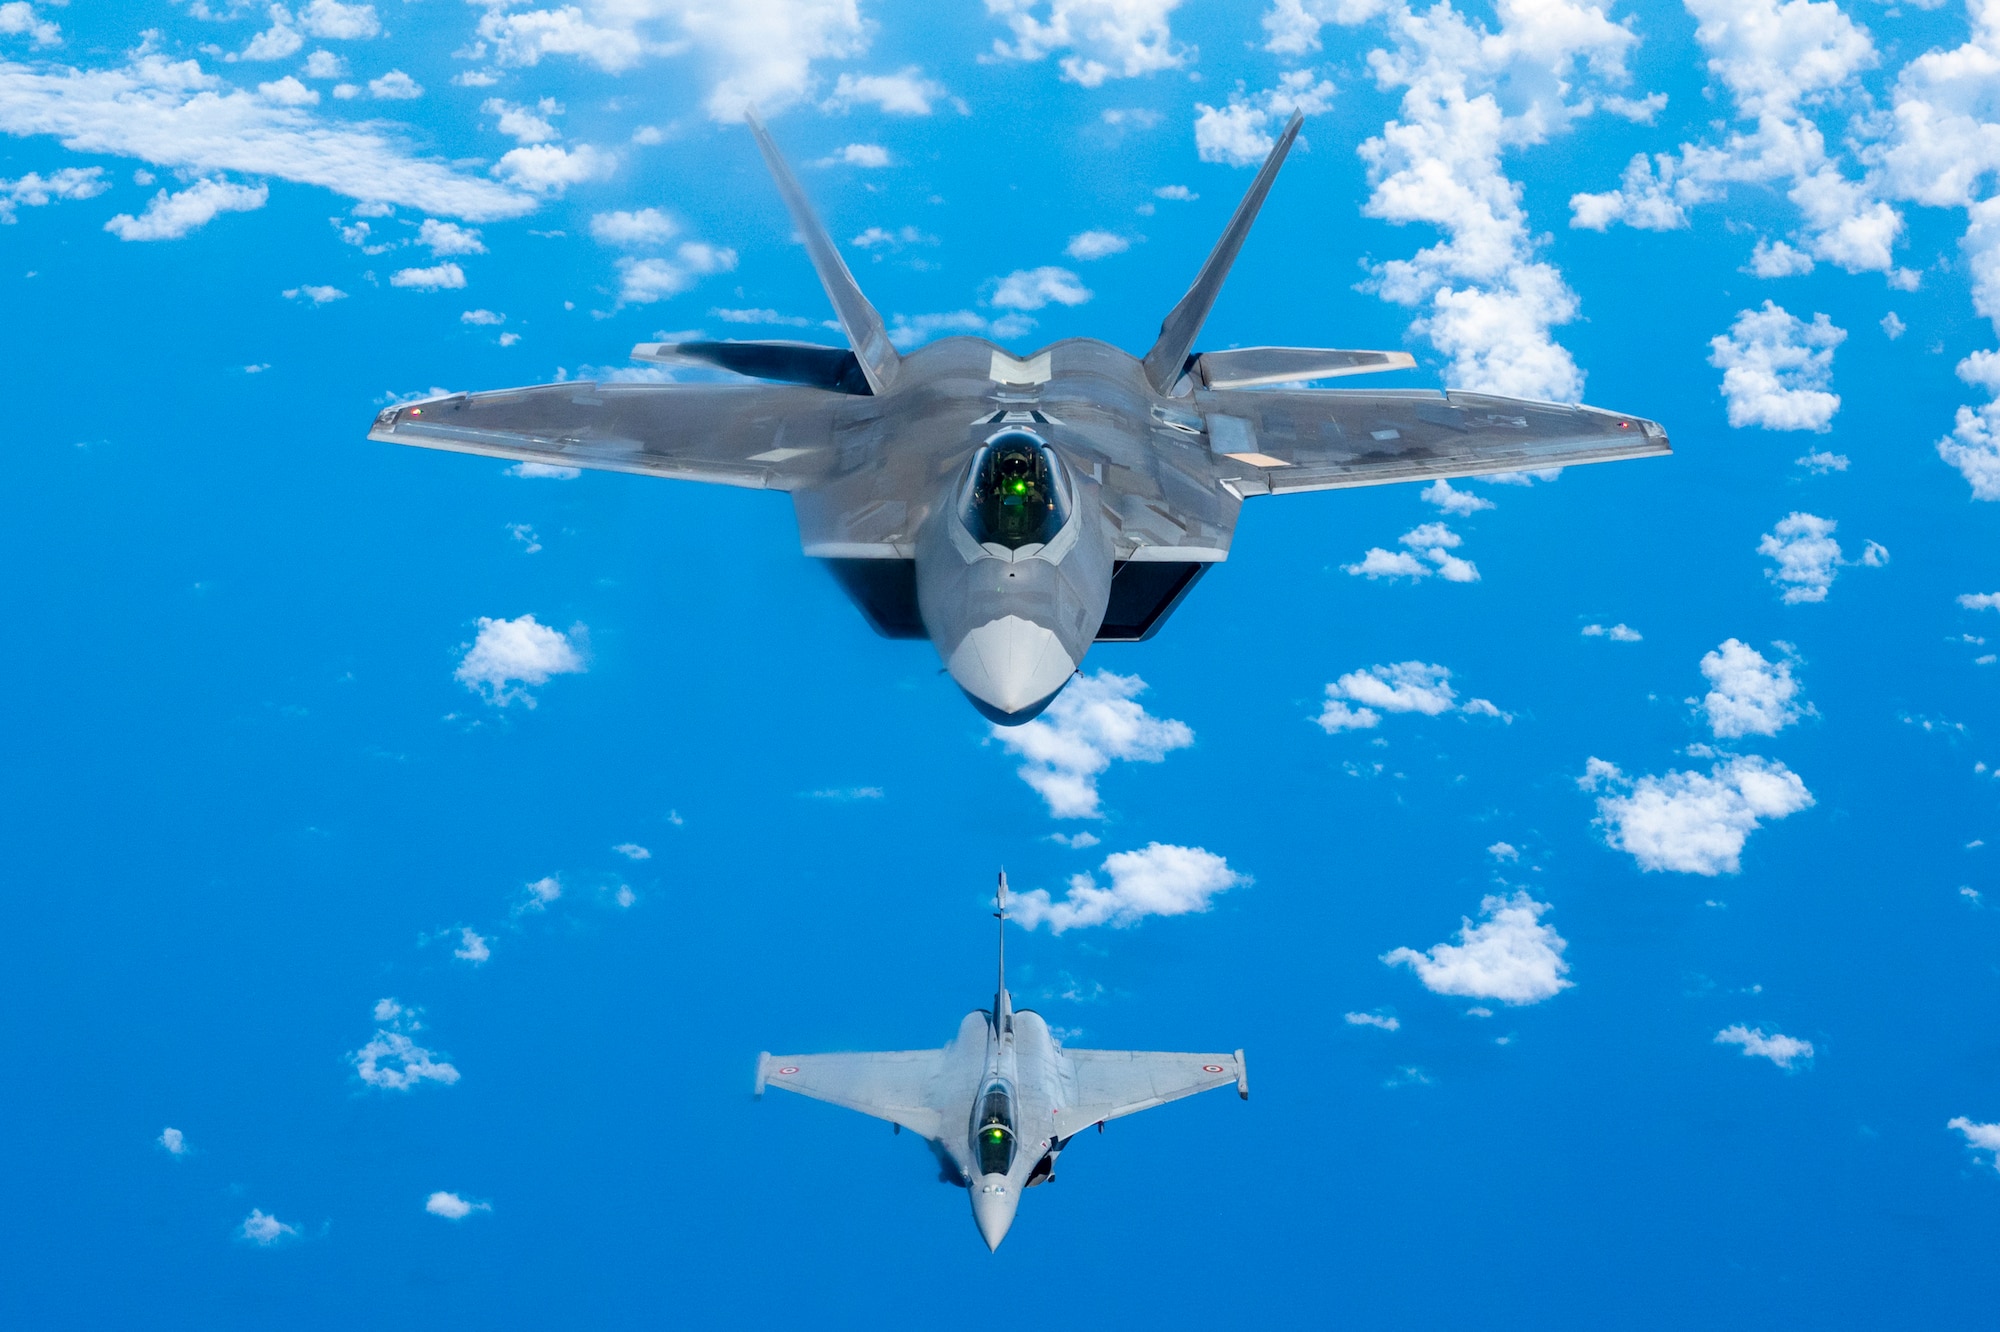 A Hawaii Air National Guard F-22 Raptor flies in formation with a French Air and Space Force F3-R Rafale June 30, 2021, near Oahu, Hawaii. FASF aircraft, maintenance, and support personnel traveled to Hawaii for exercise Wakea as part of the bilateral cooperation in the Pacific between the United States and France.